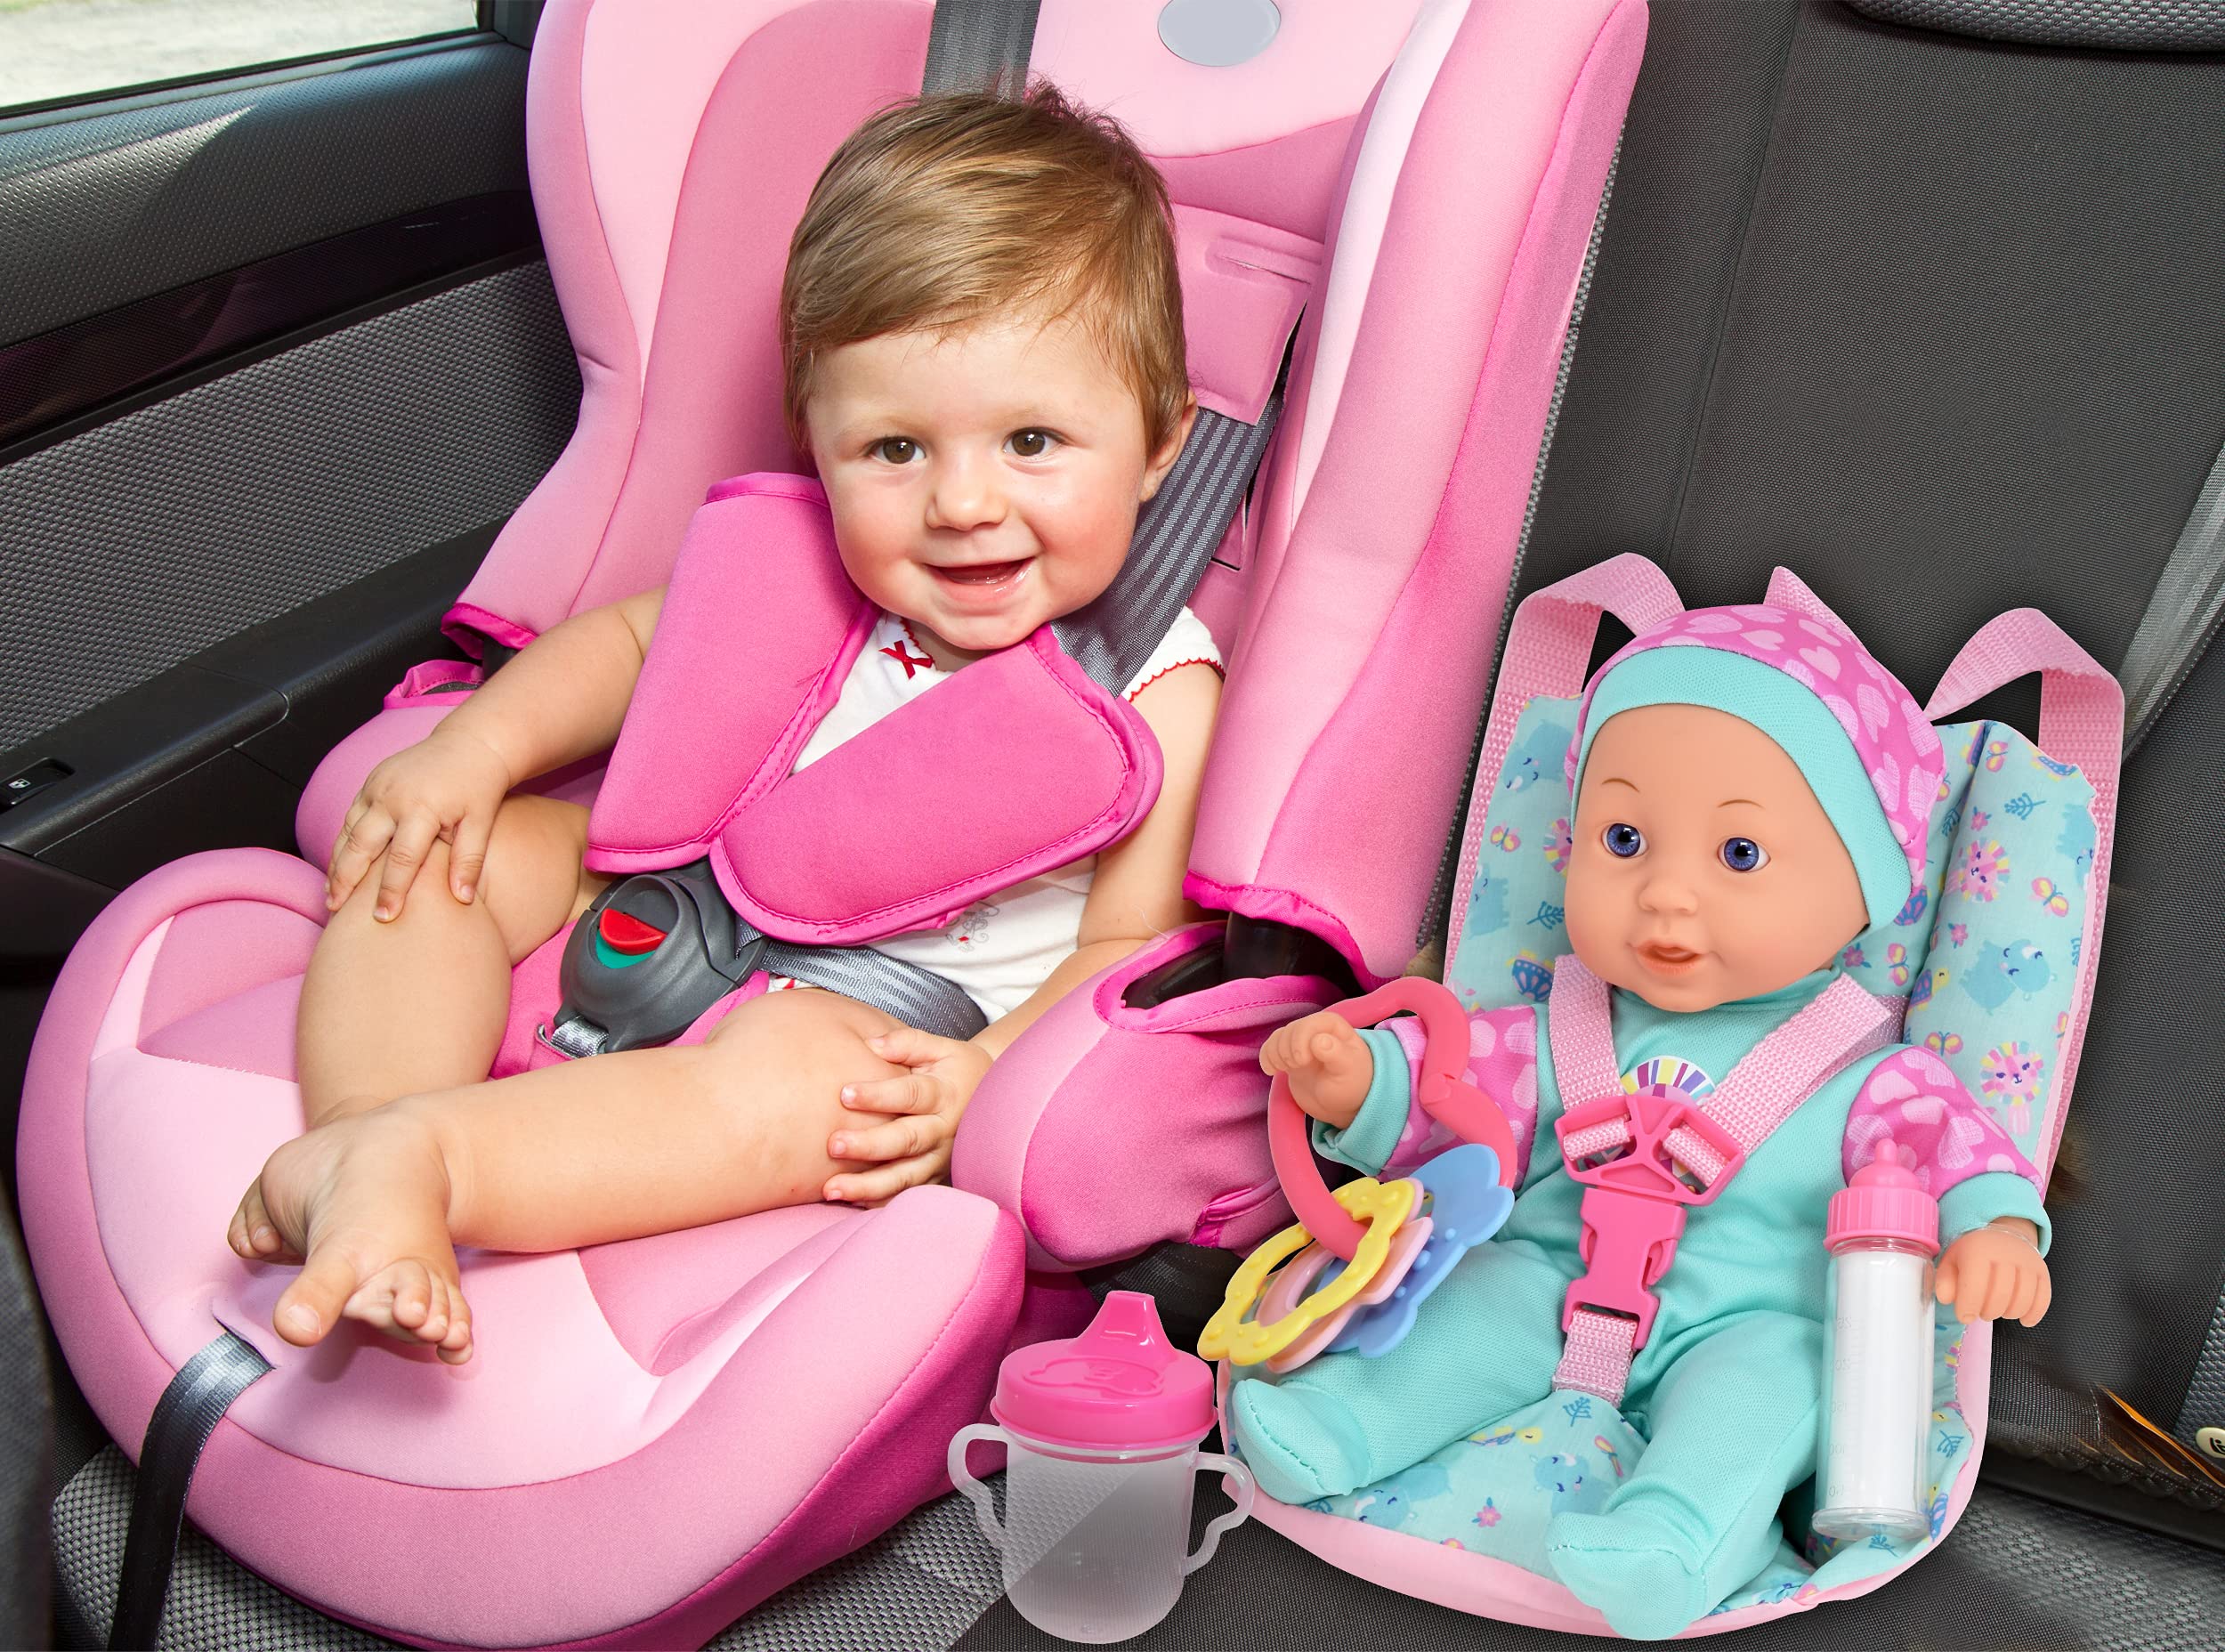 12 Inch Soft Body Baby Doll with Car Seat Carrier Backpack, Baby Doll with 2 Feeding Bottles Bib Rattle Toy Accessories Baby Doll Travel Gift Play Set for Toddlers Infants Kids Girls and Boys